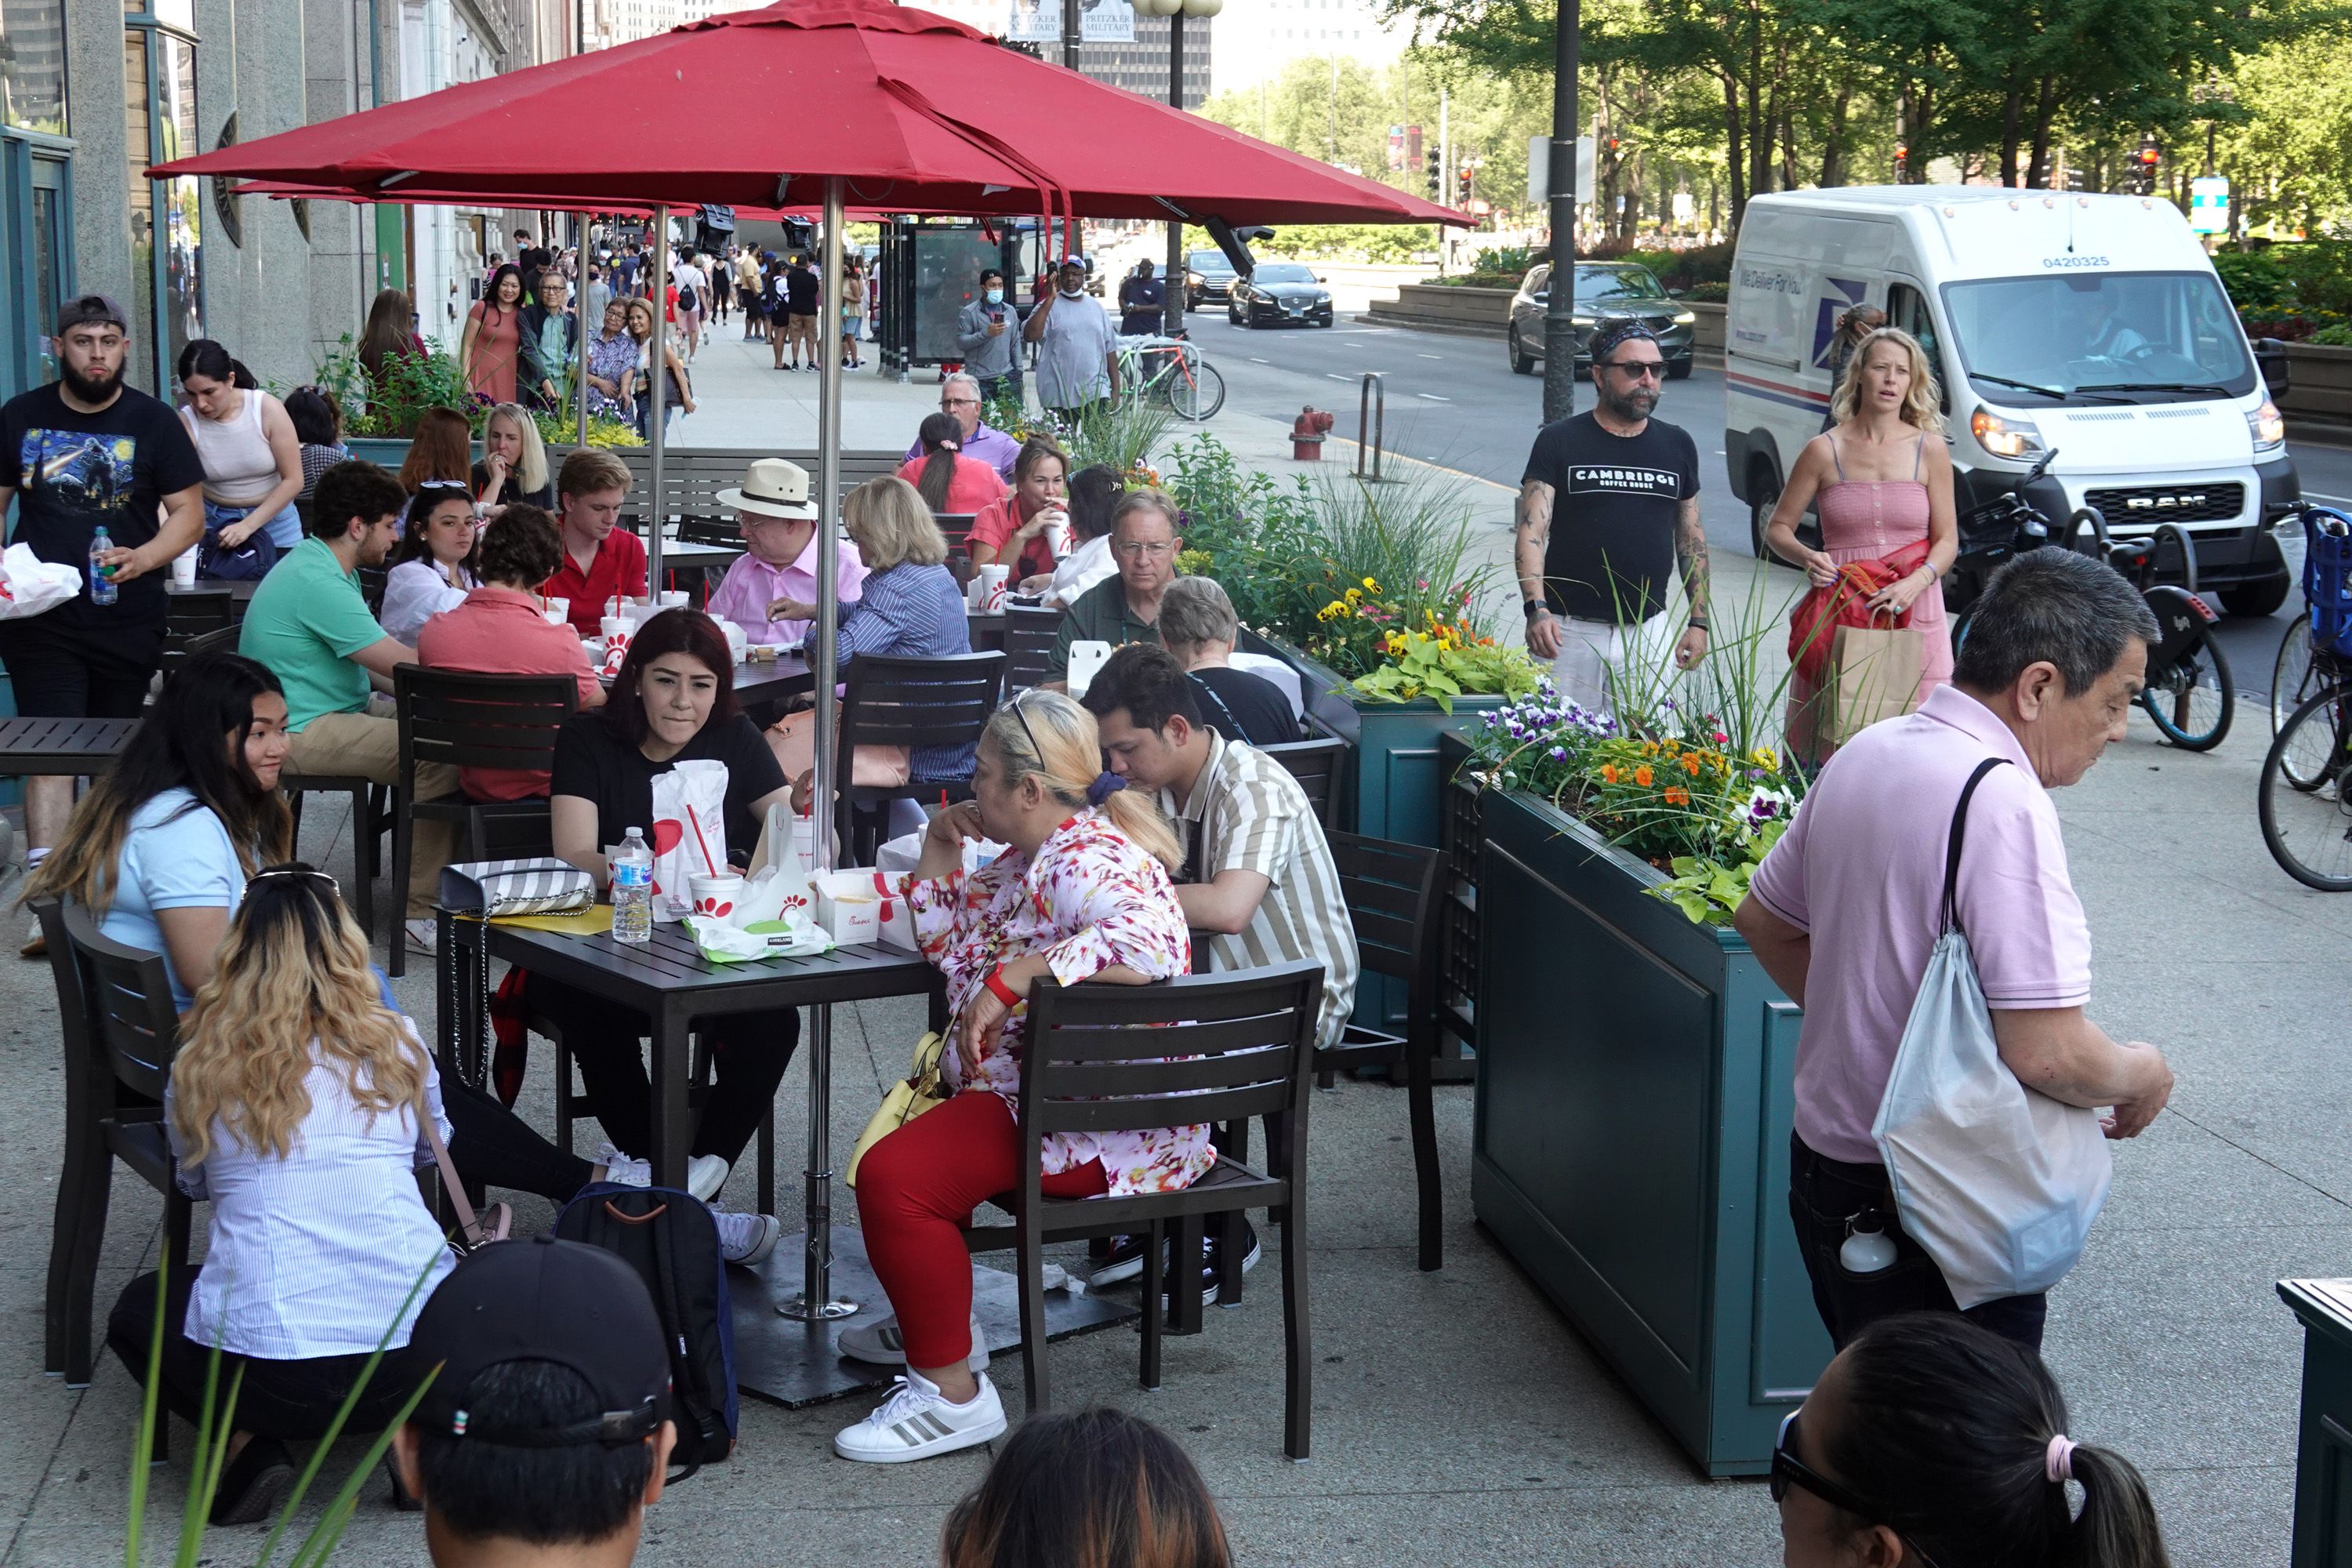 People gather for lunch at a restaurant on Michigan Avenue on June 11, 2021 in Chicago, Illinois. 